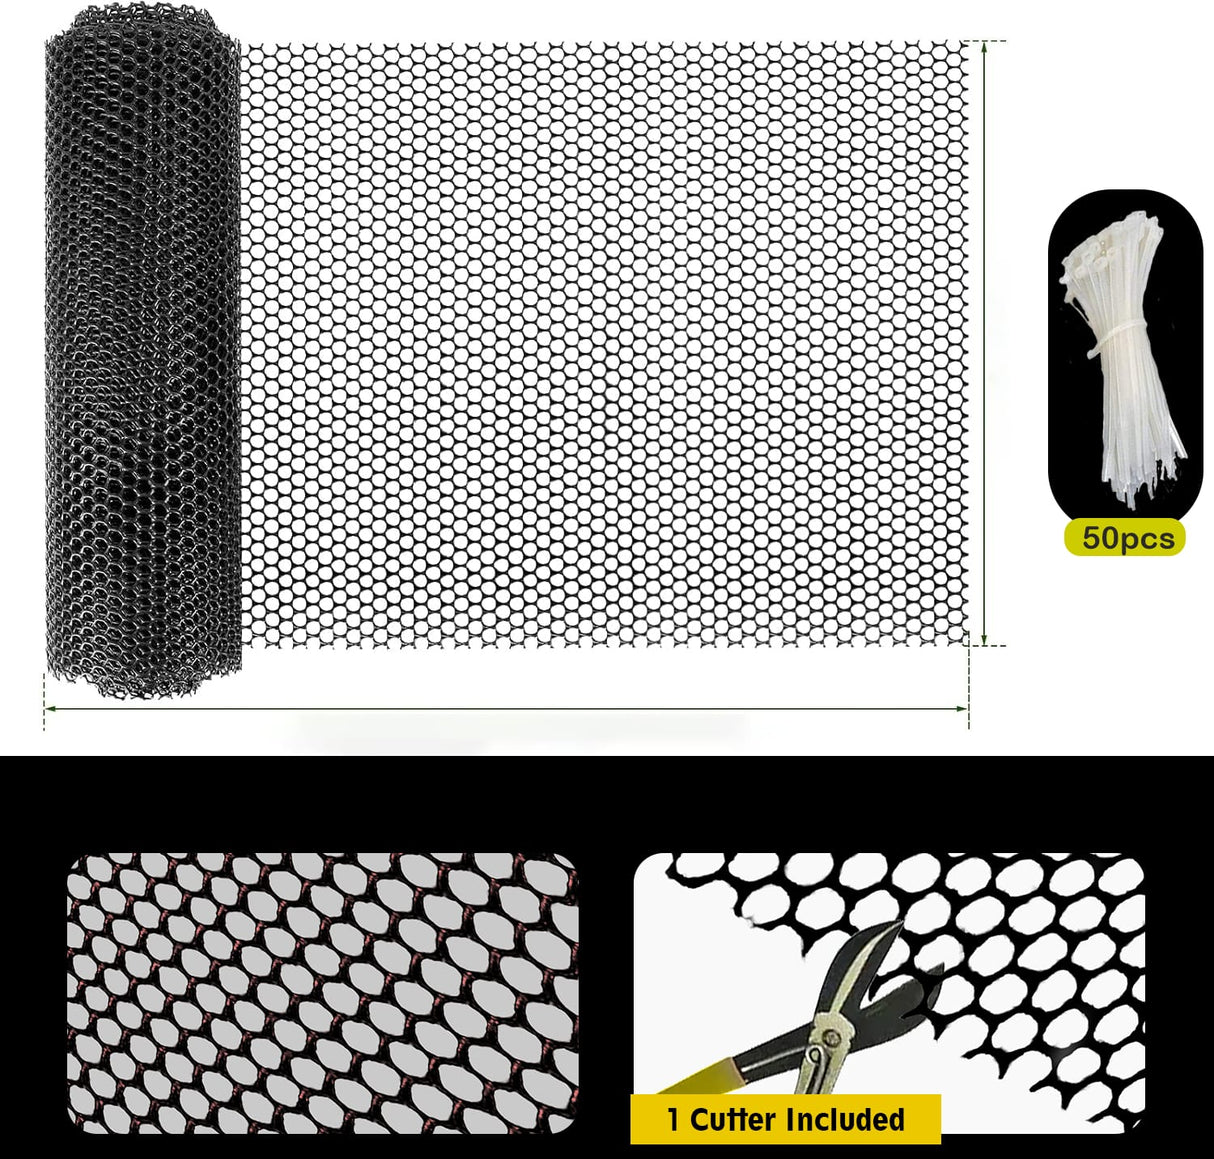 Tree Guard Net, Garden Fencing Net Virgin Plastic Black Color with 1 Cutter and 50 PVC Tag